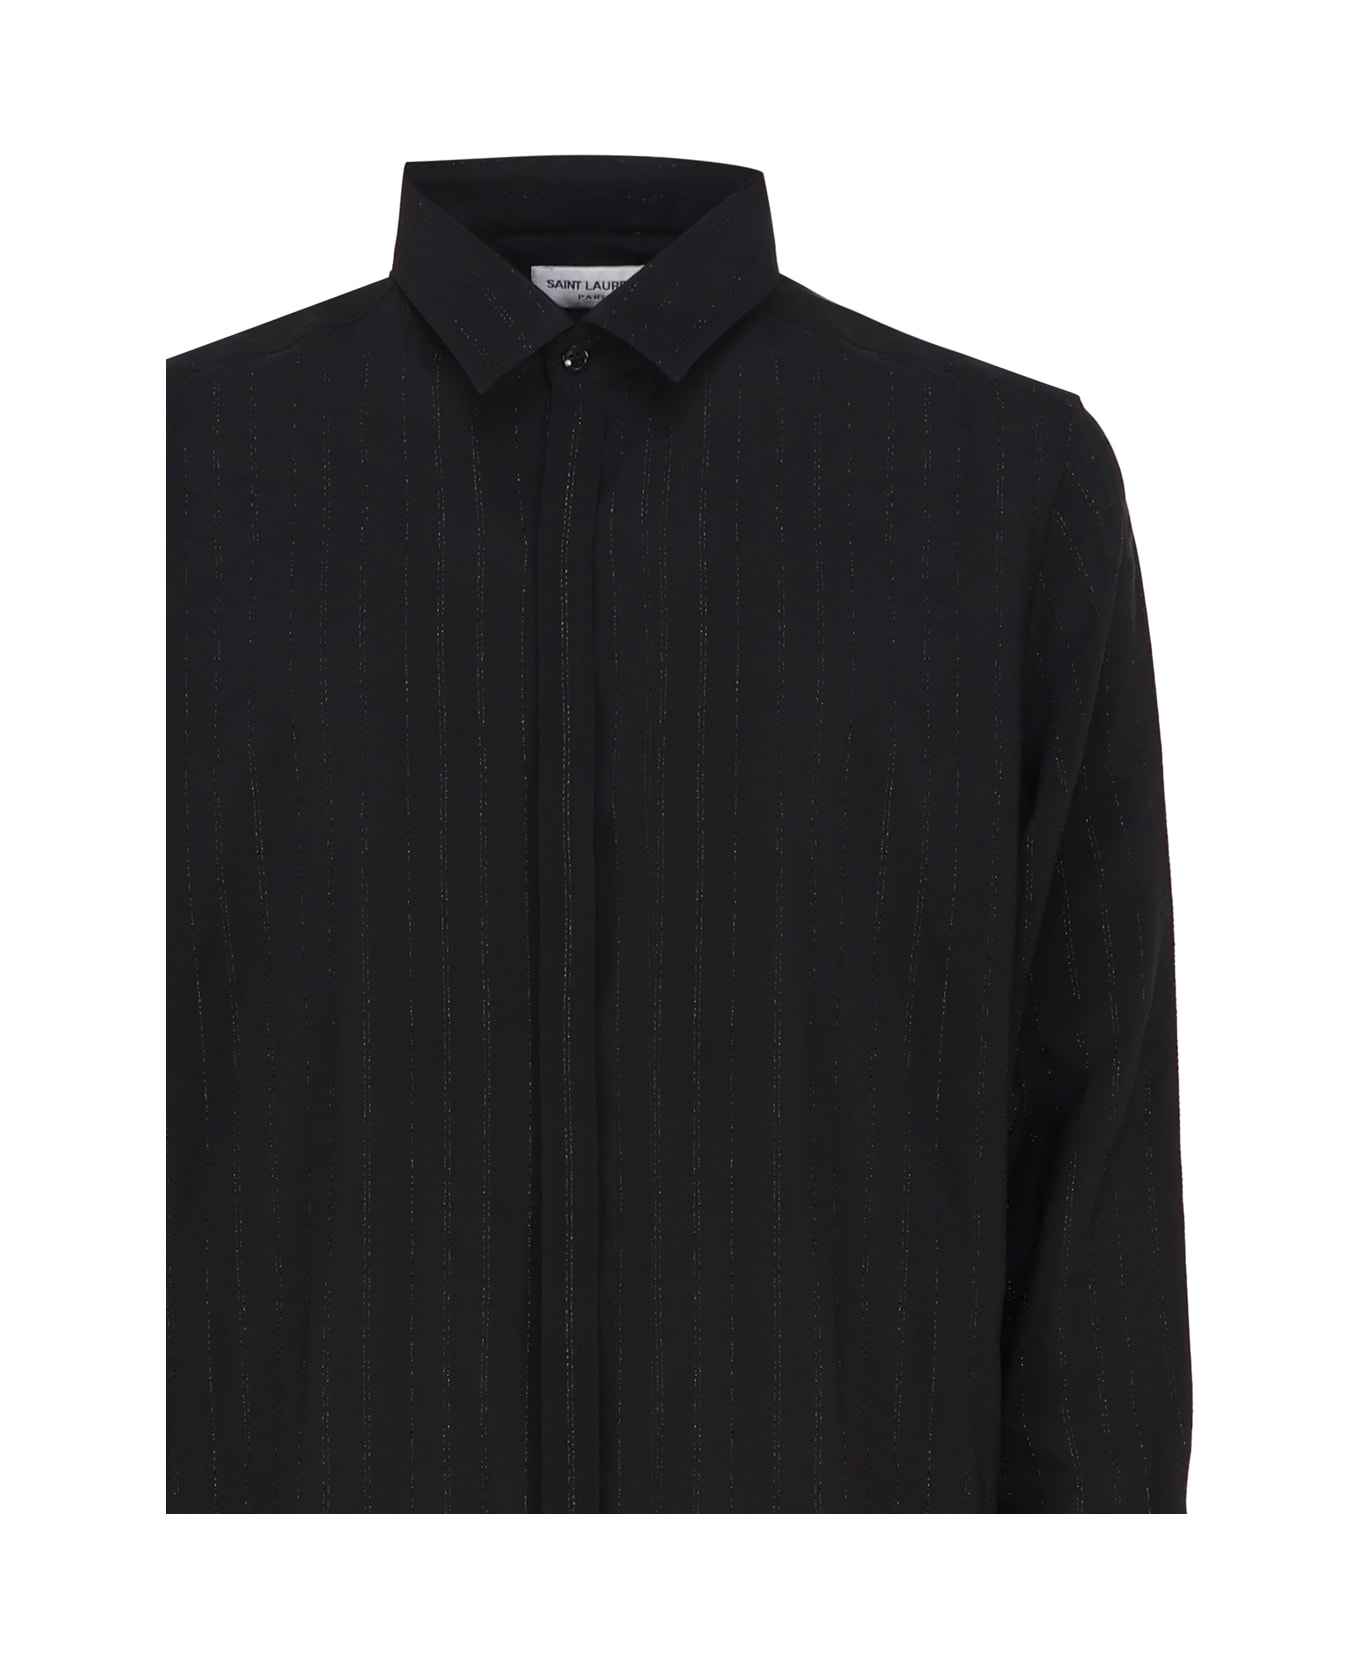 Saint Laurent Shirt With Buttons And Pointed Collar - Black